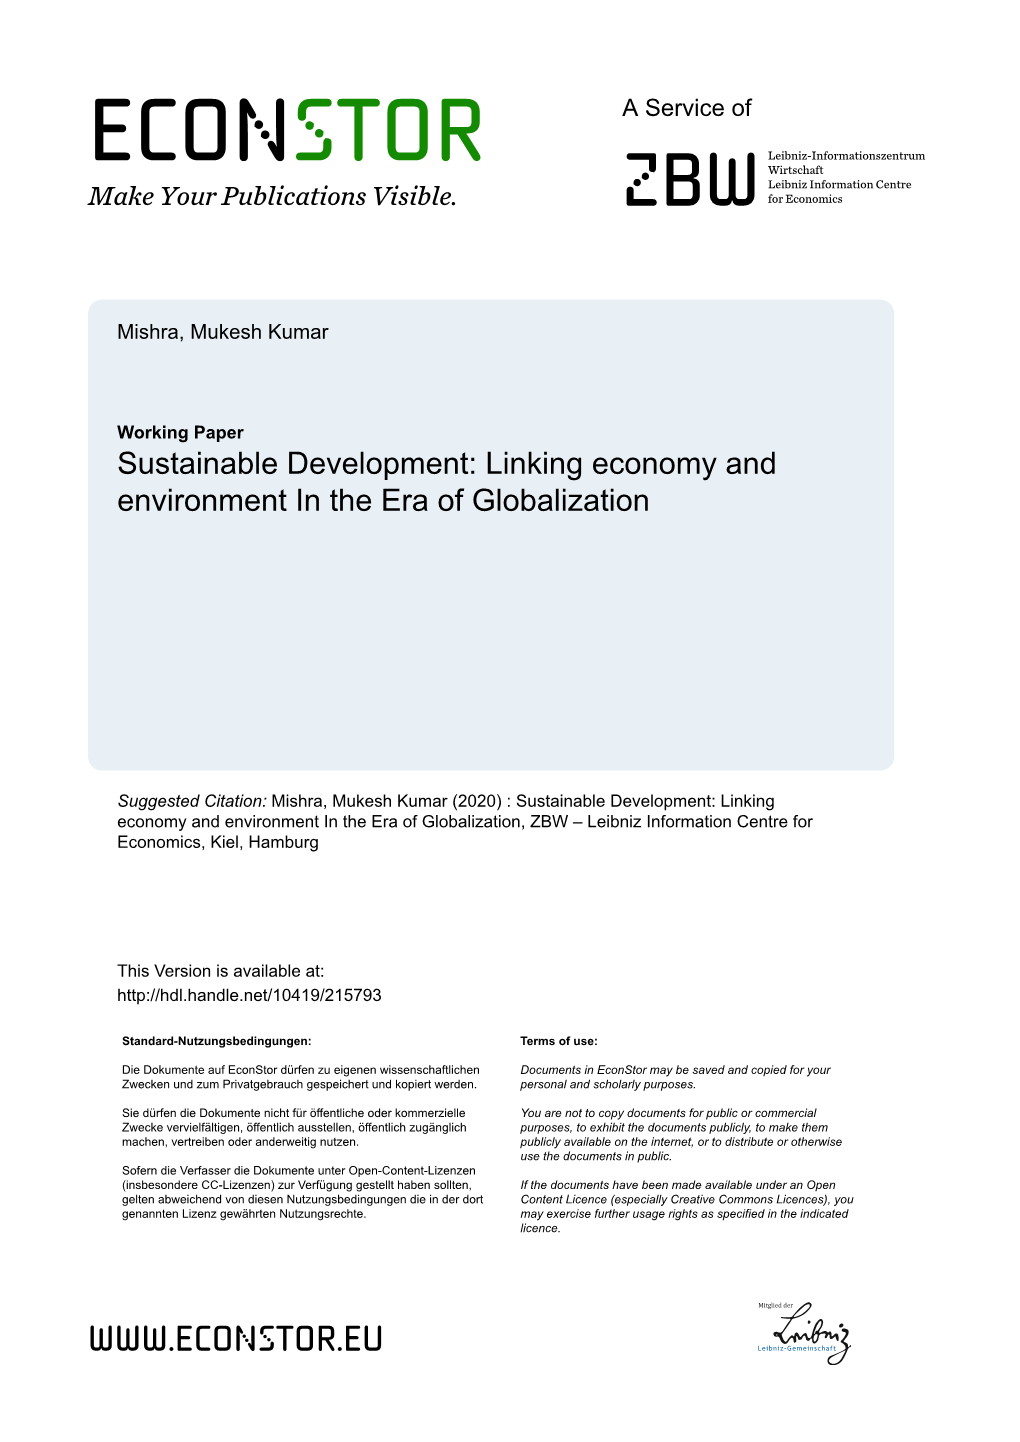 Linking Economy and Environment in the Era of Globalization